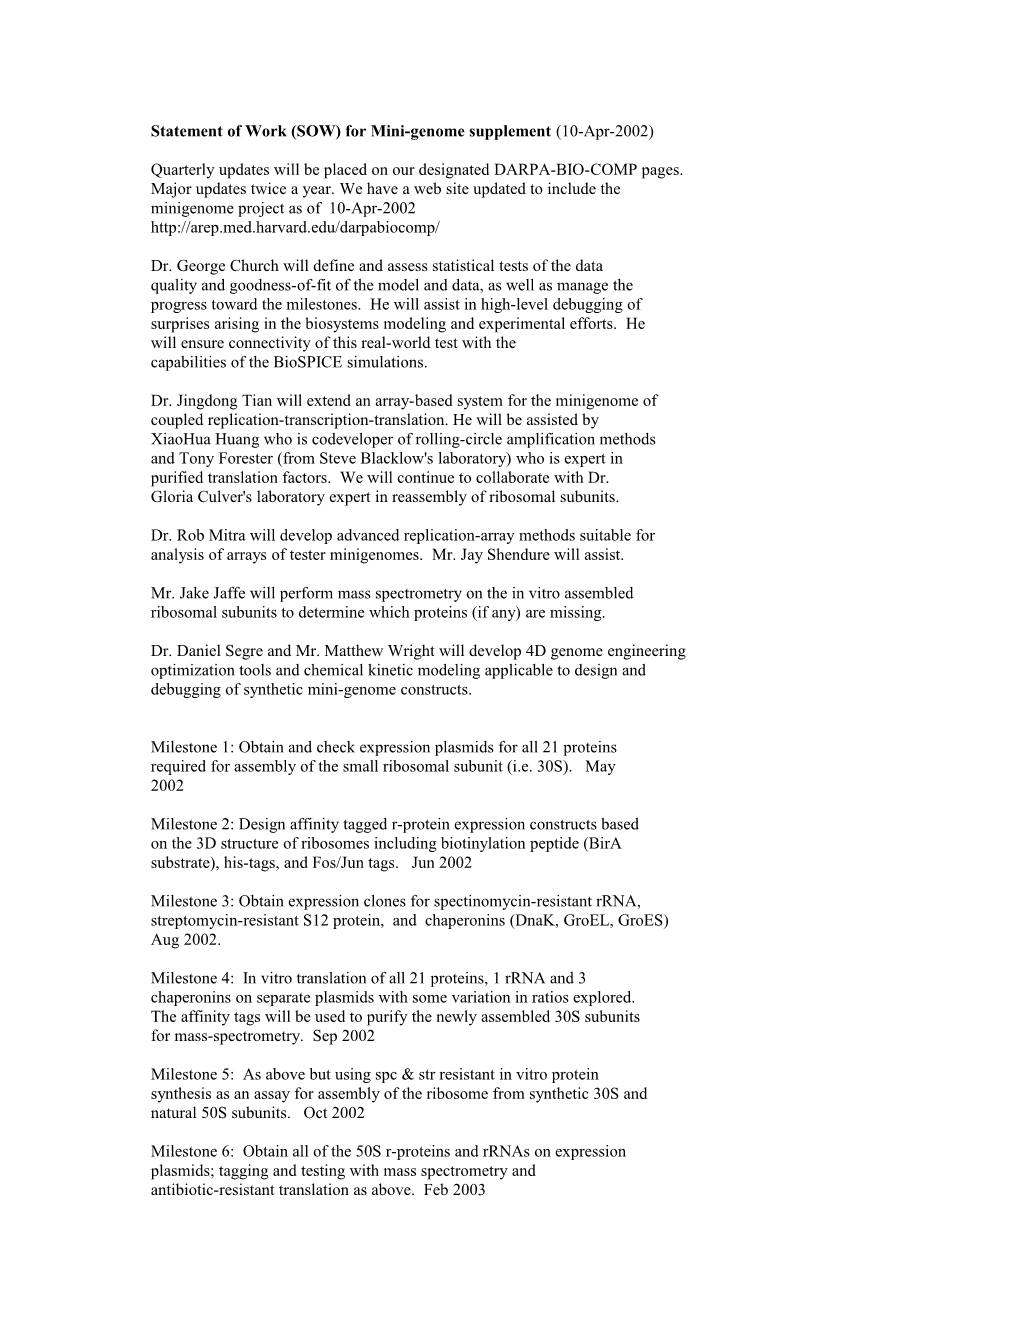 Statement of Work (SOW) for Mini-Genome Supplement (10-Apr-2002)